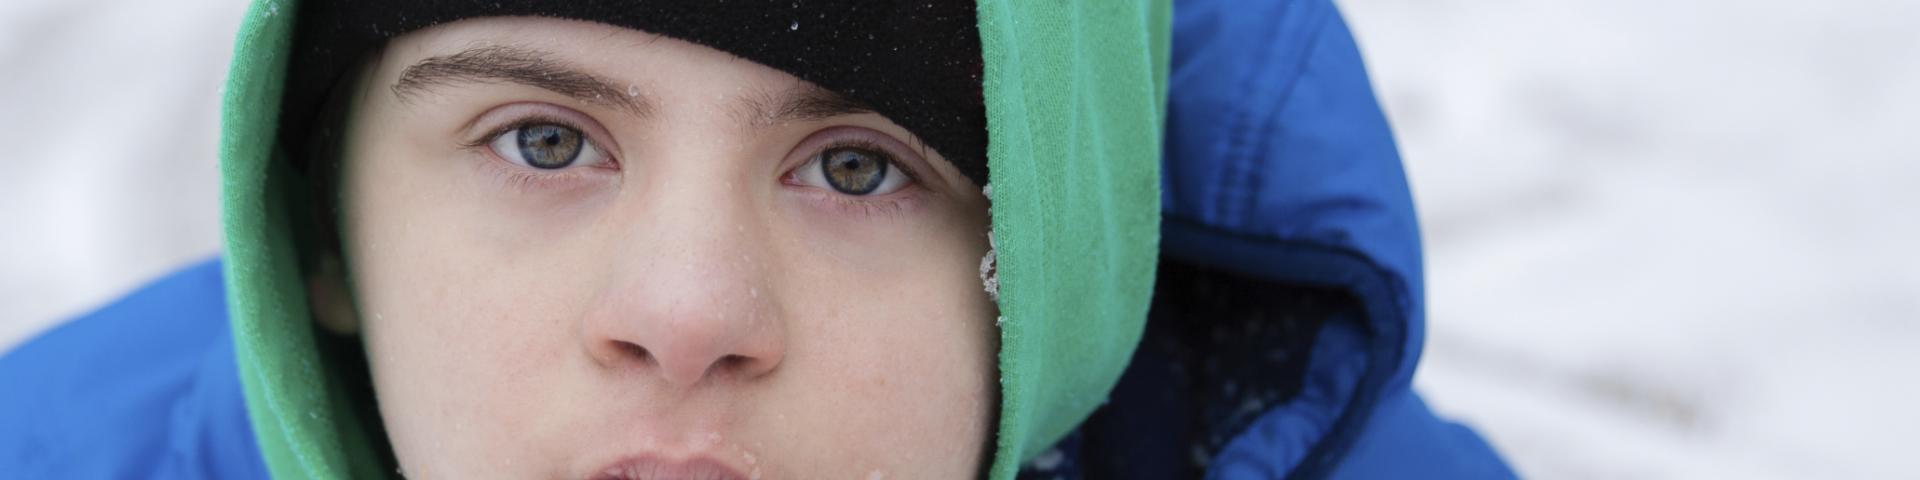 A boy in a winter setting looking at the camera